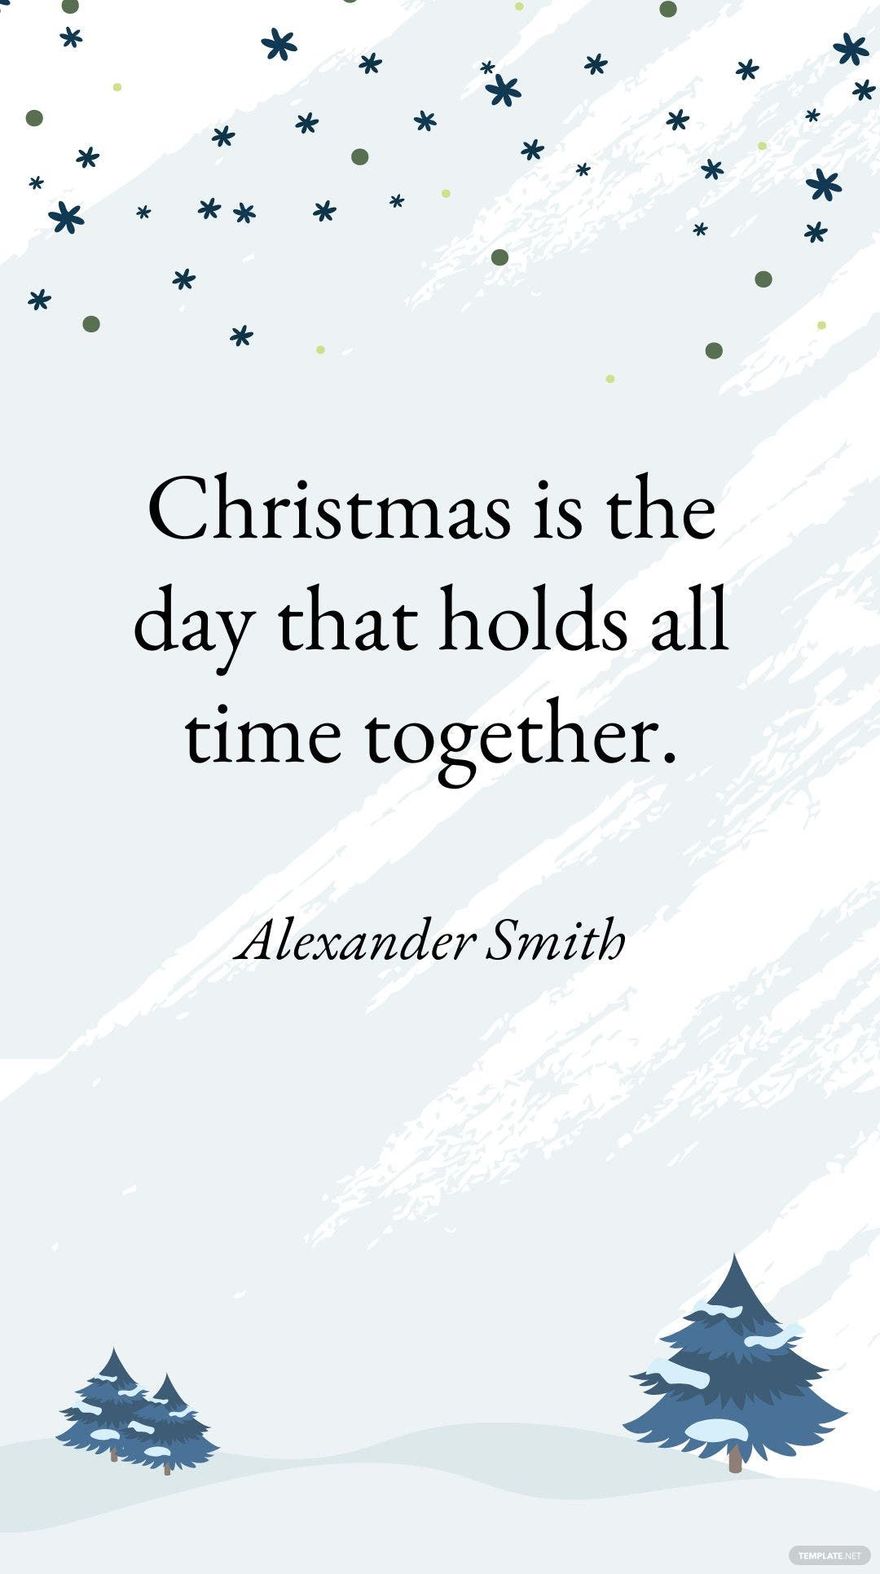 Alexander Smith - Christmas is the day that holds all time together.